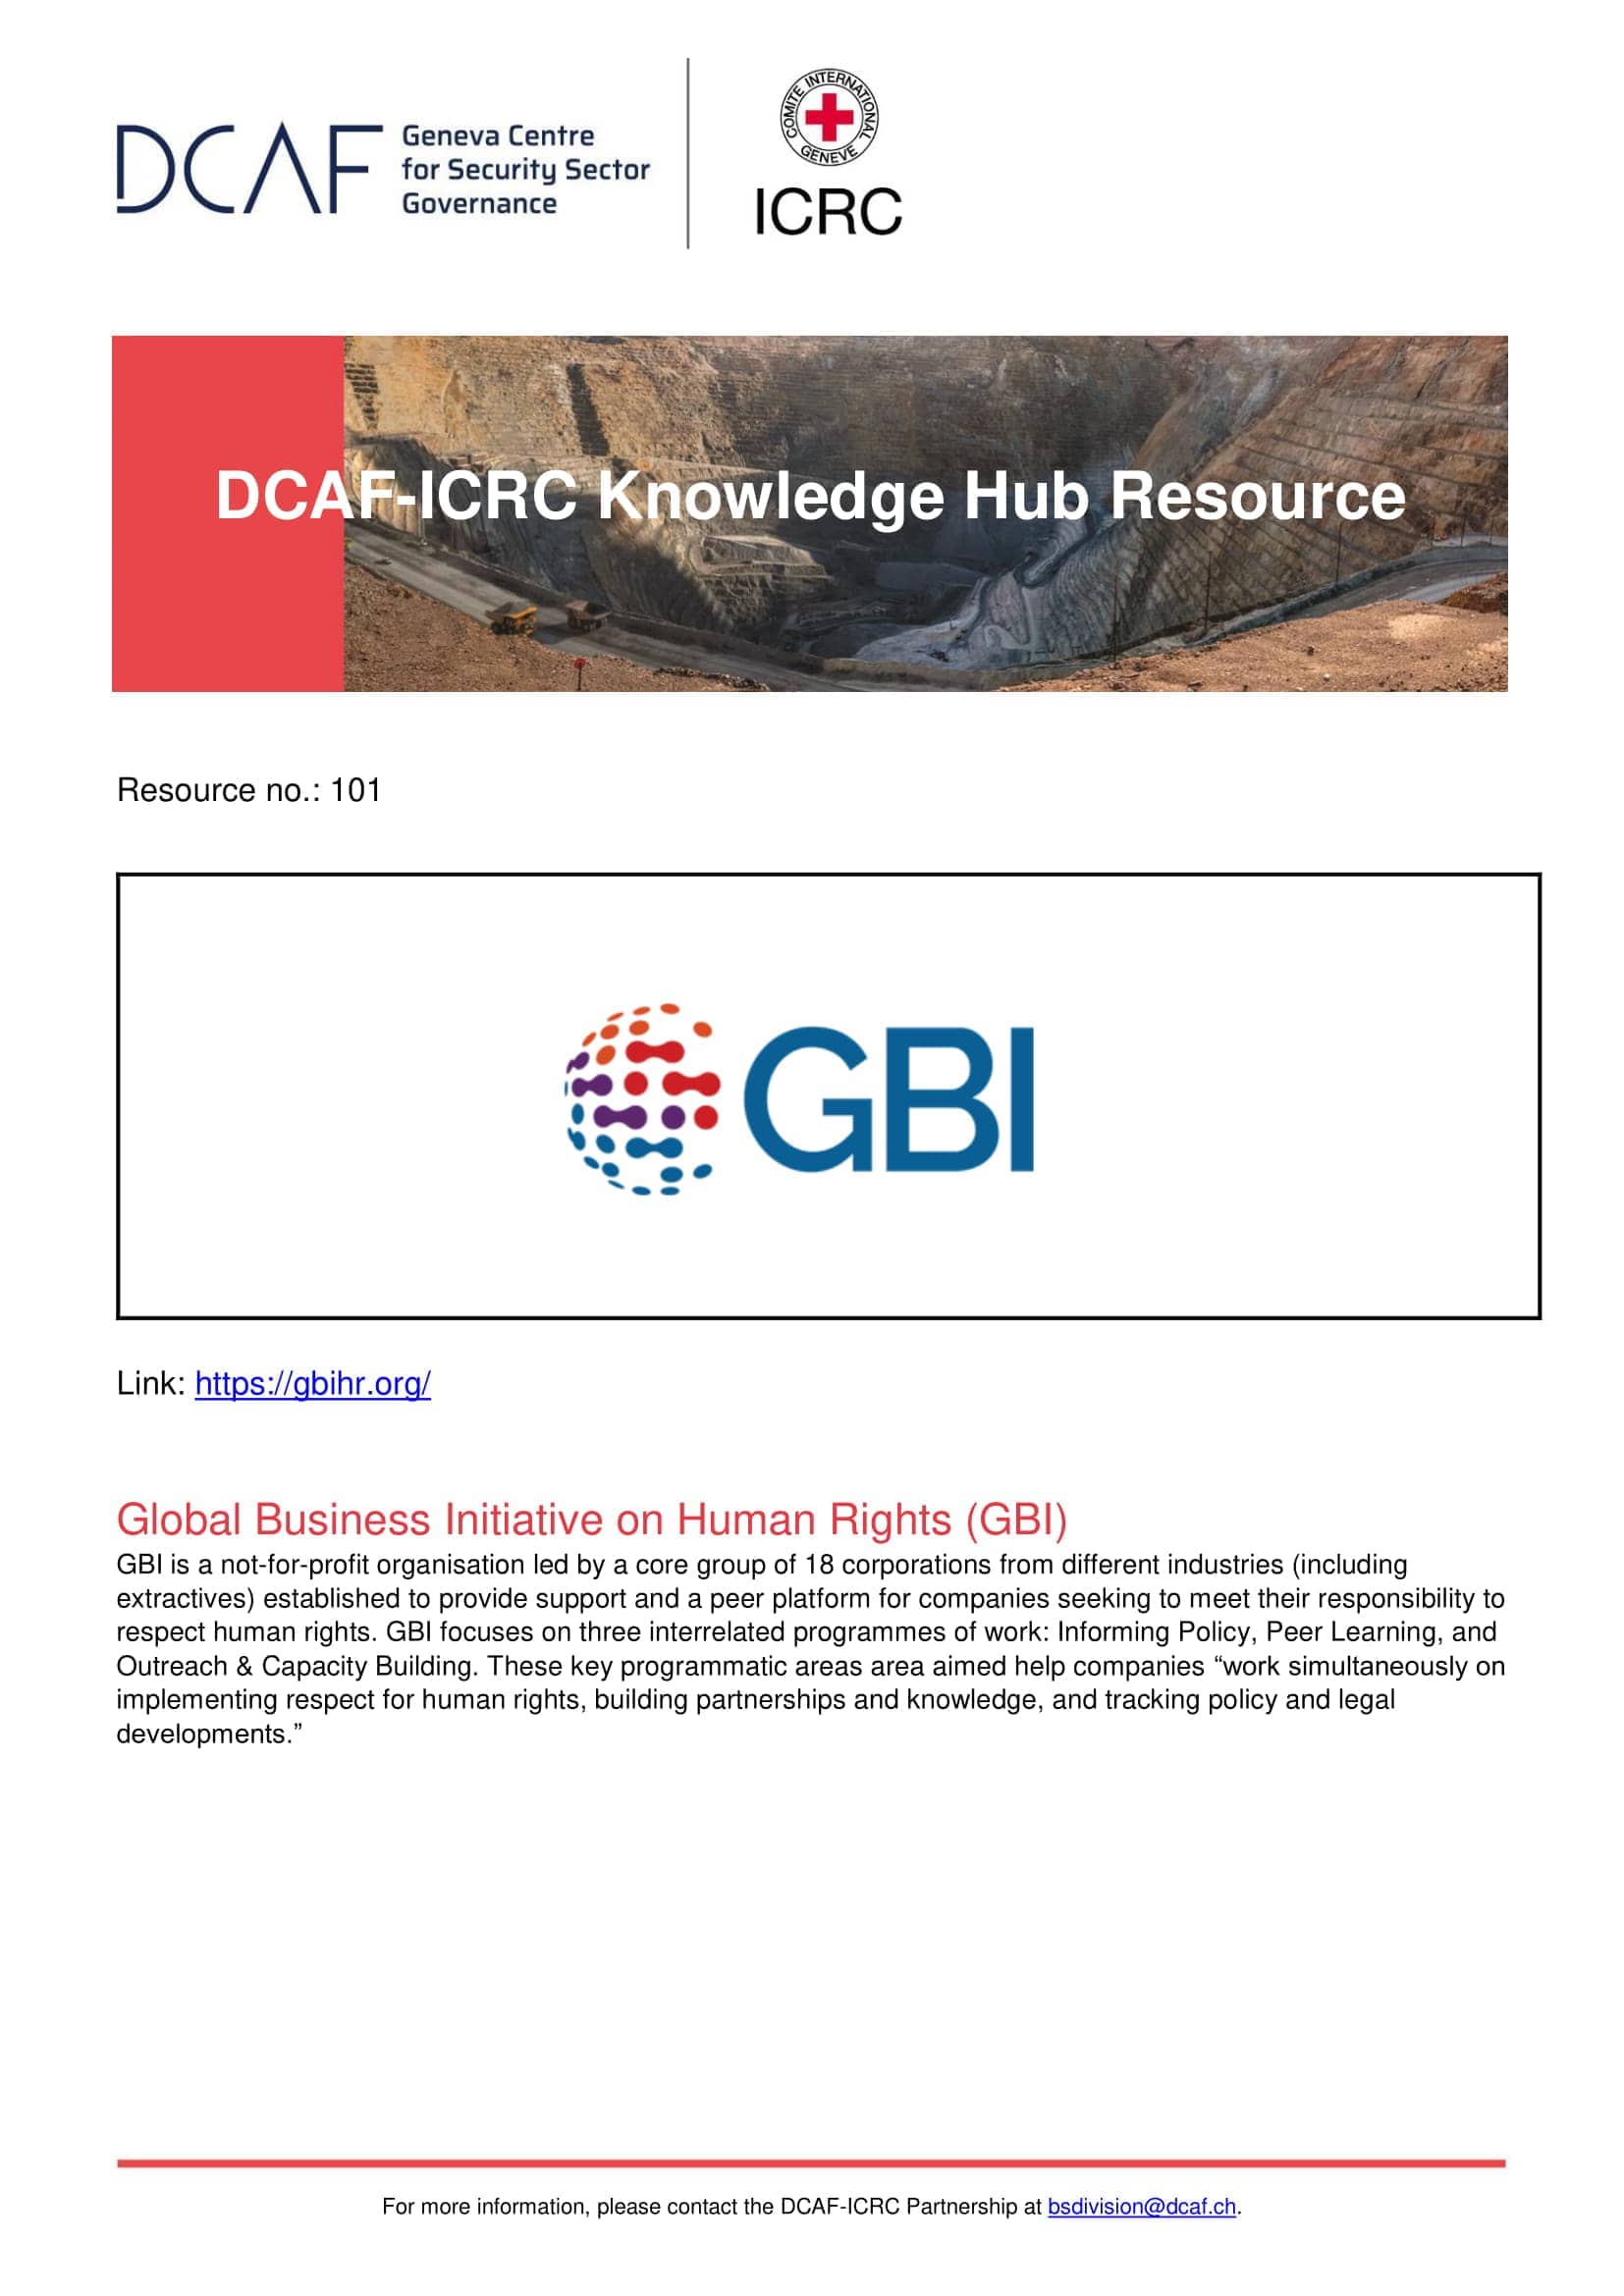 Global Business Initiative on Human Rights (GBI)